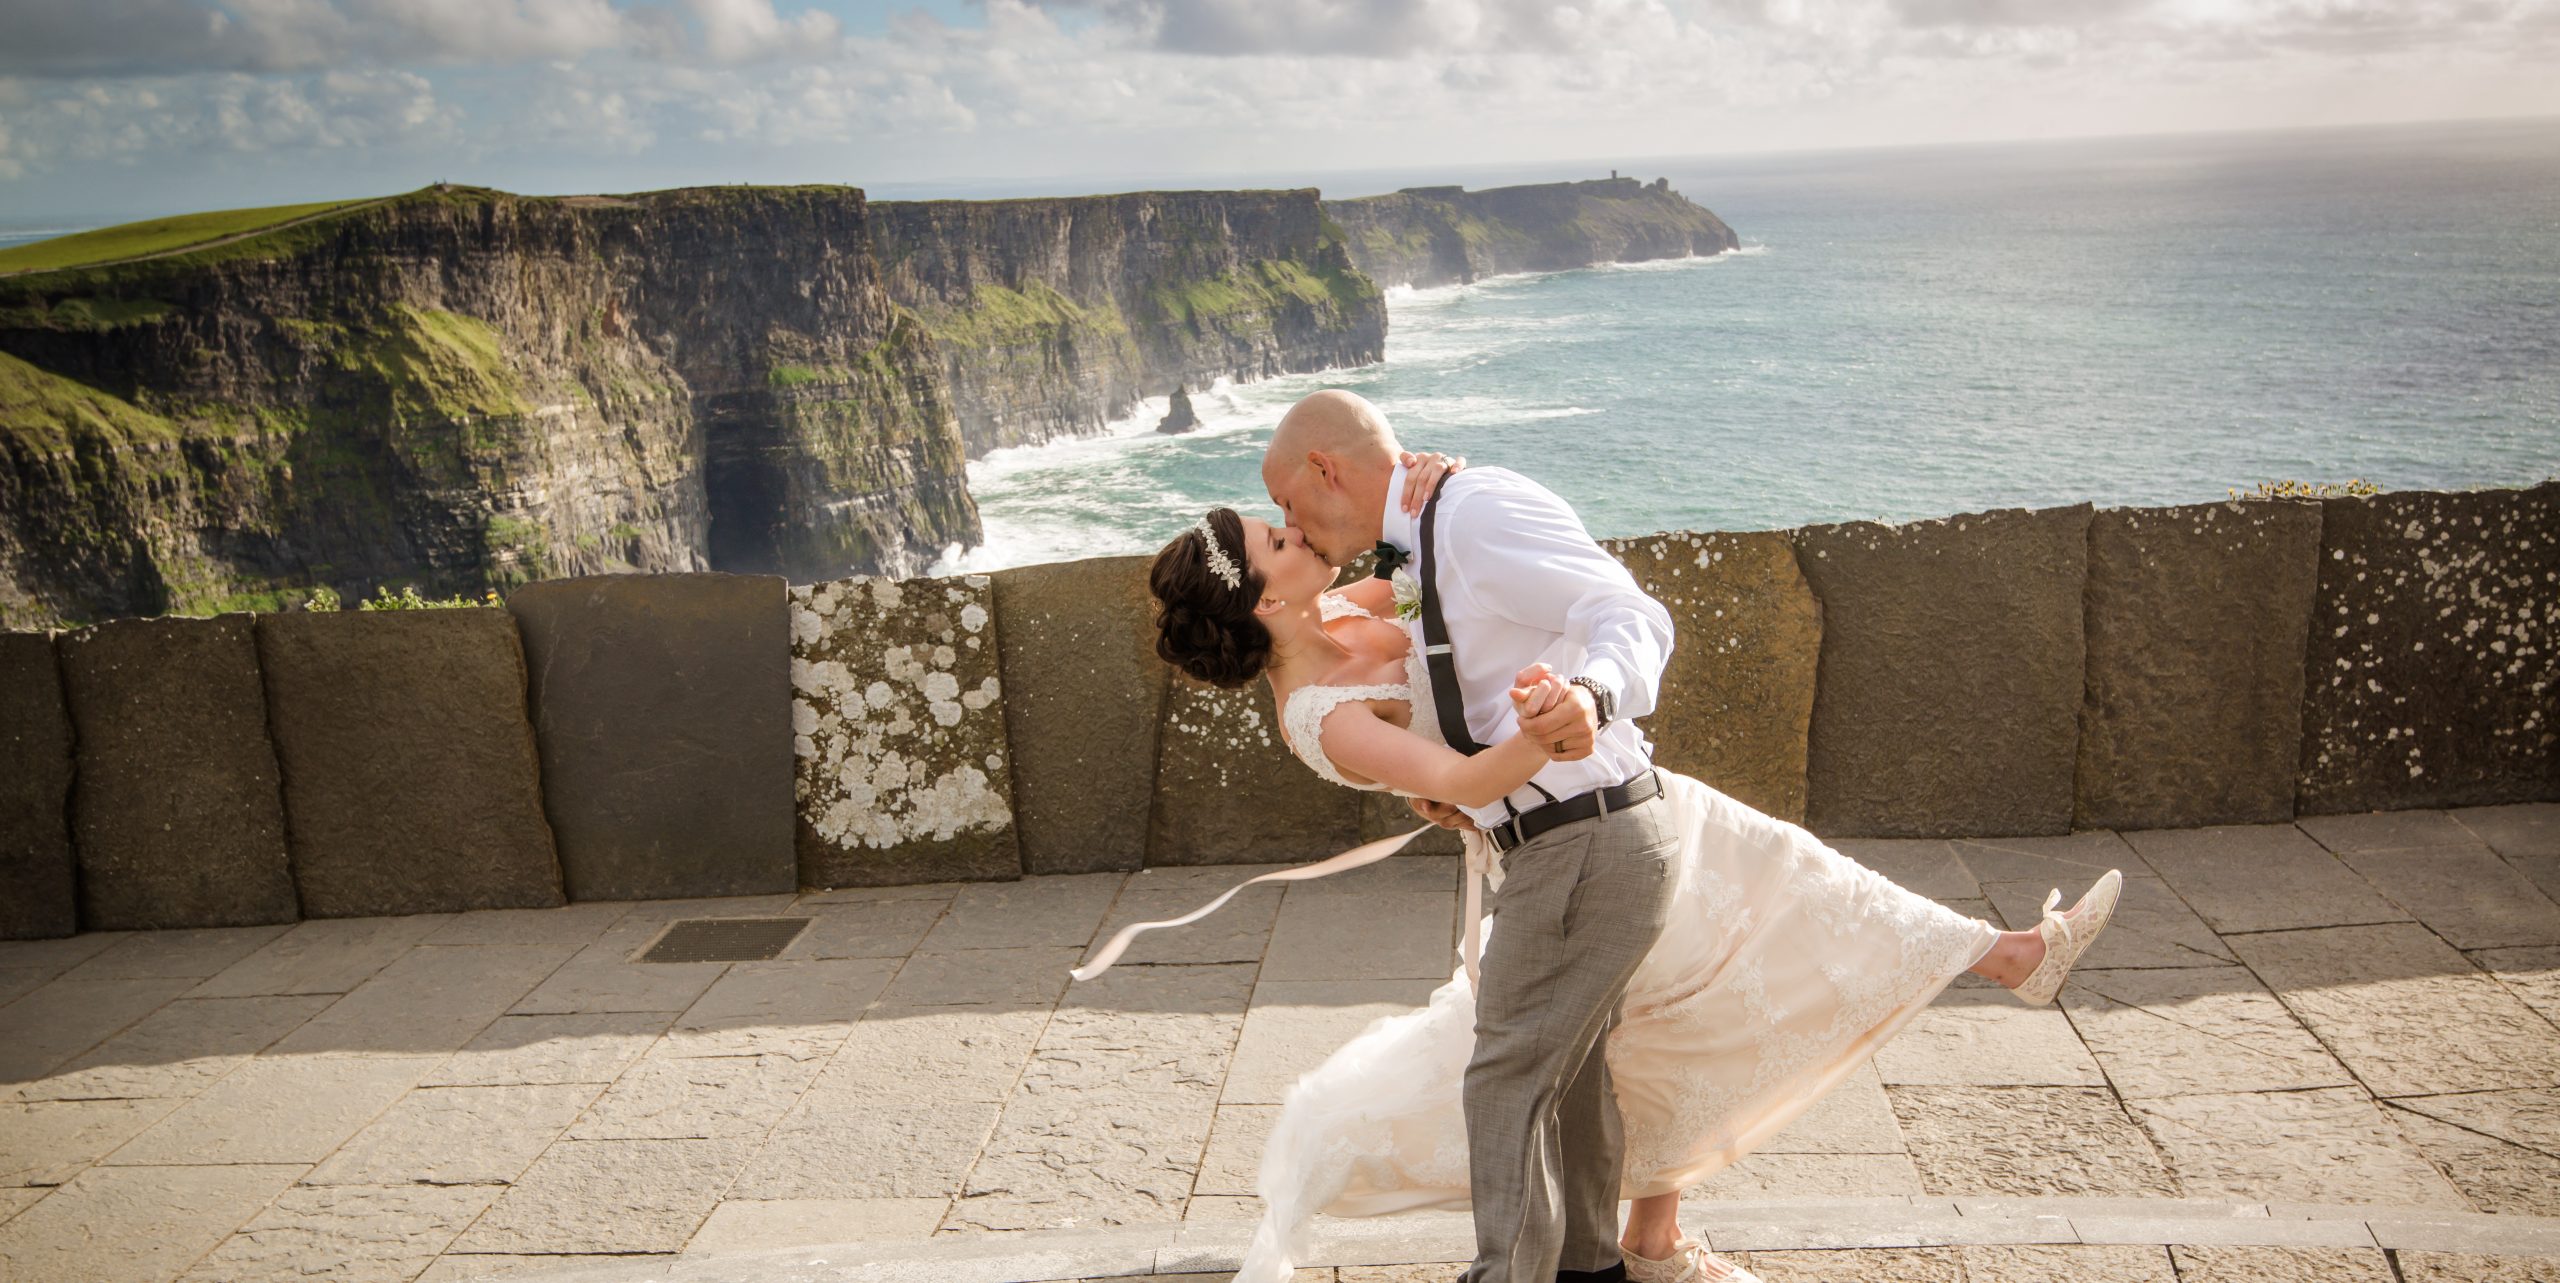 Weddings at Cliffs of Moher